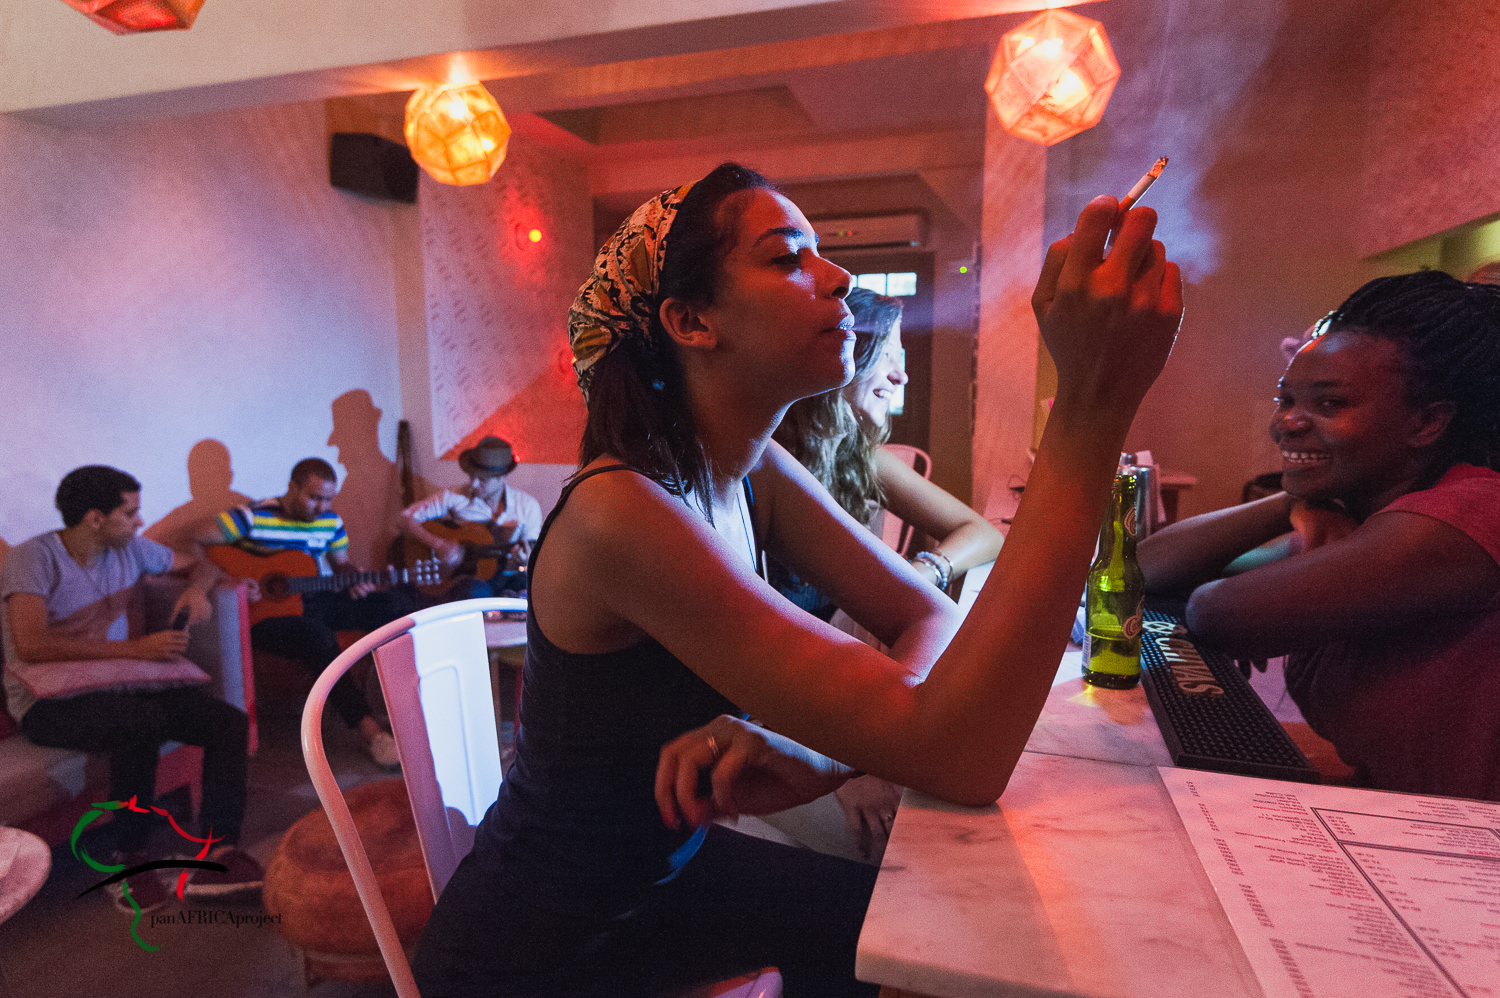 Woman smoking a cigarette in a restaurant